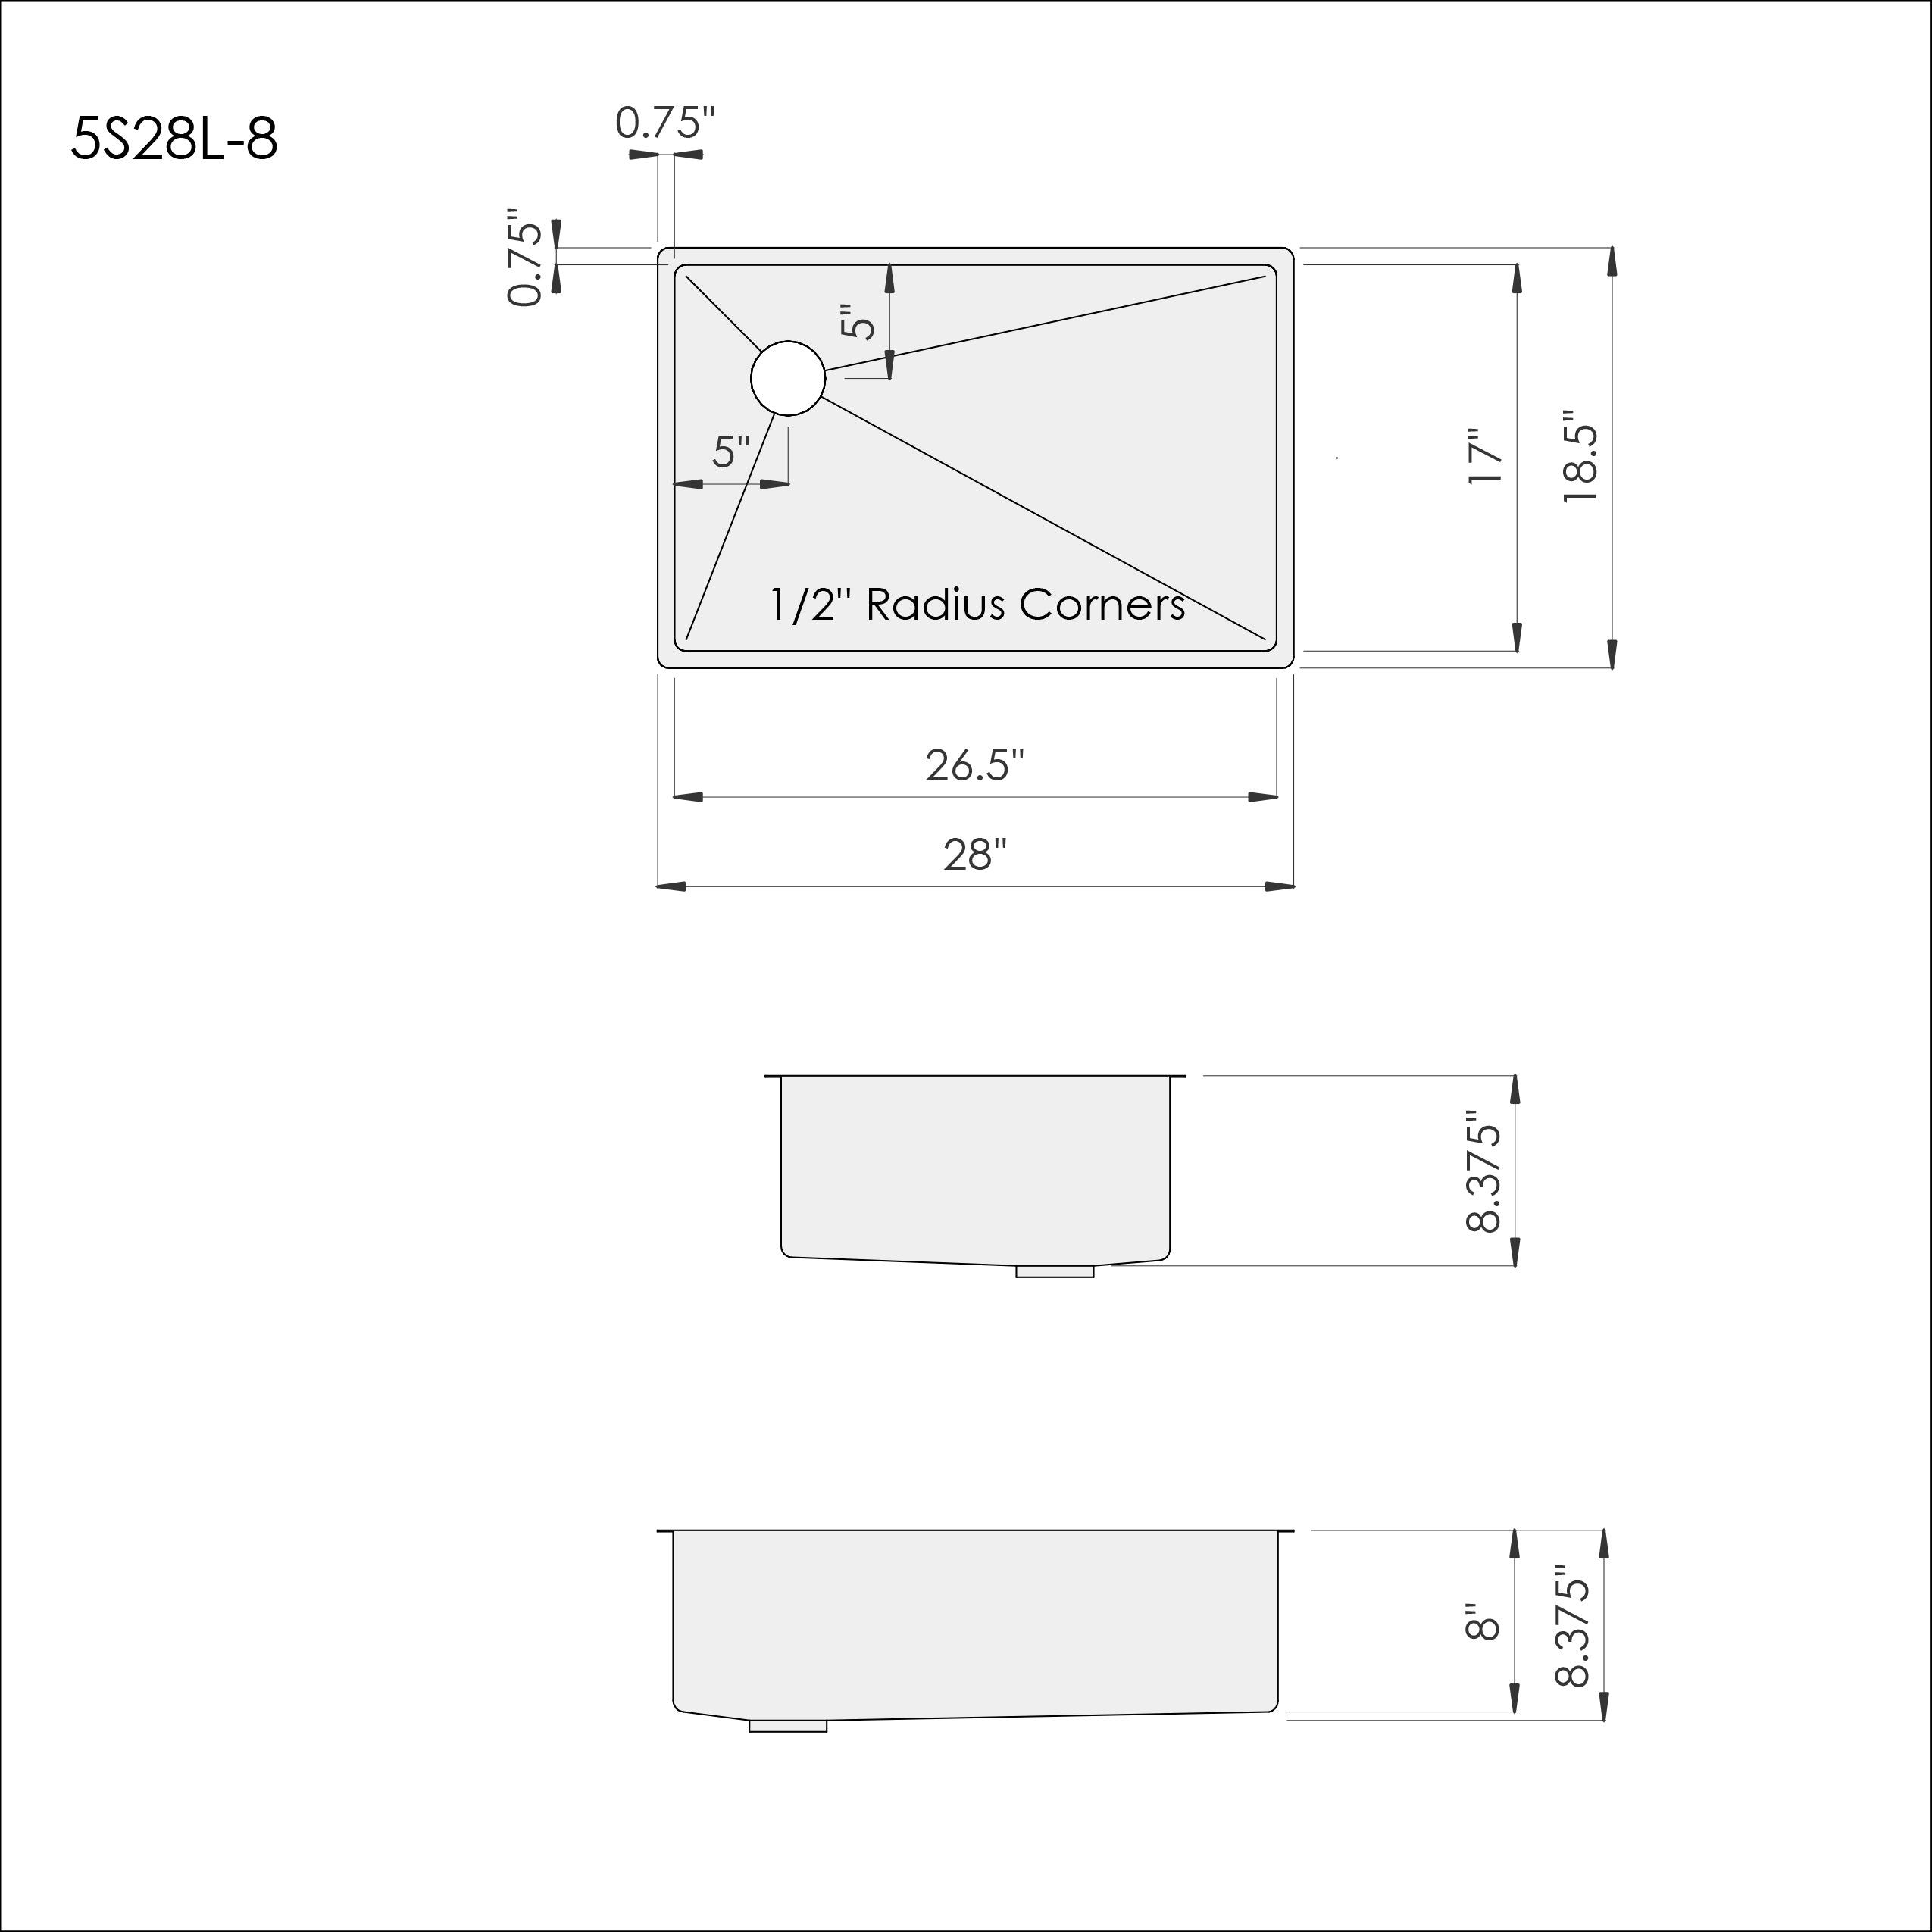 Dimensions of Create Good Sinks 28" Stainless Steel Undermount Kitchen Sink, Stainless Steel Sink, Stainless Sink, Create Good Sinks